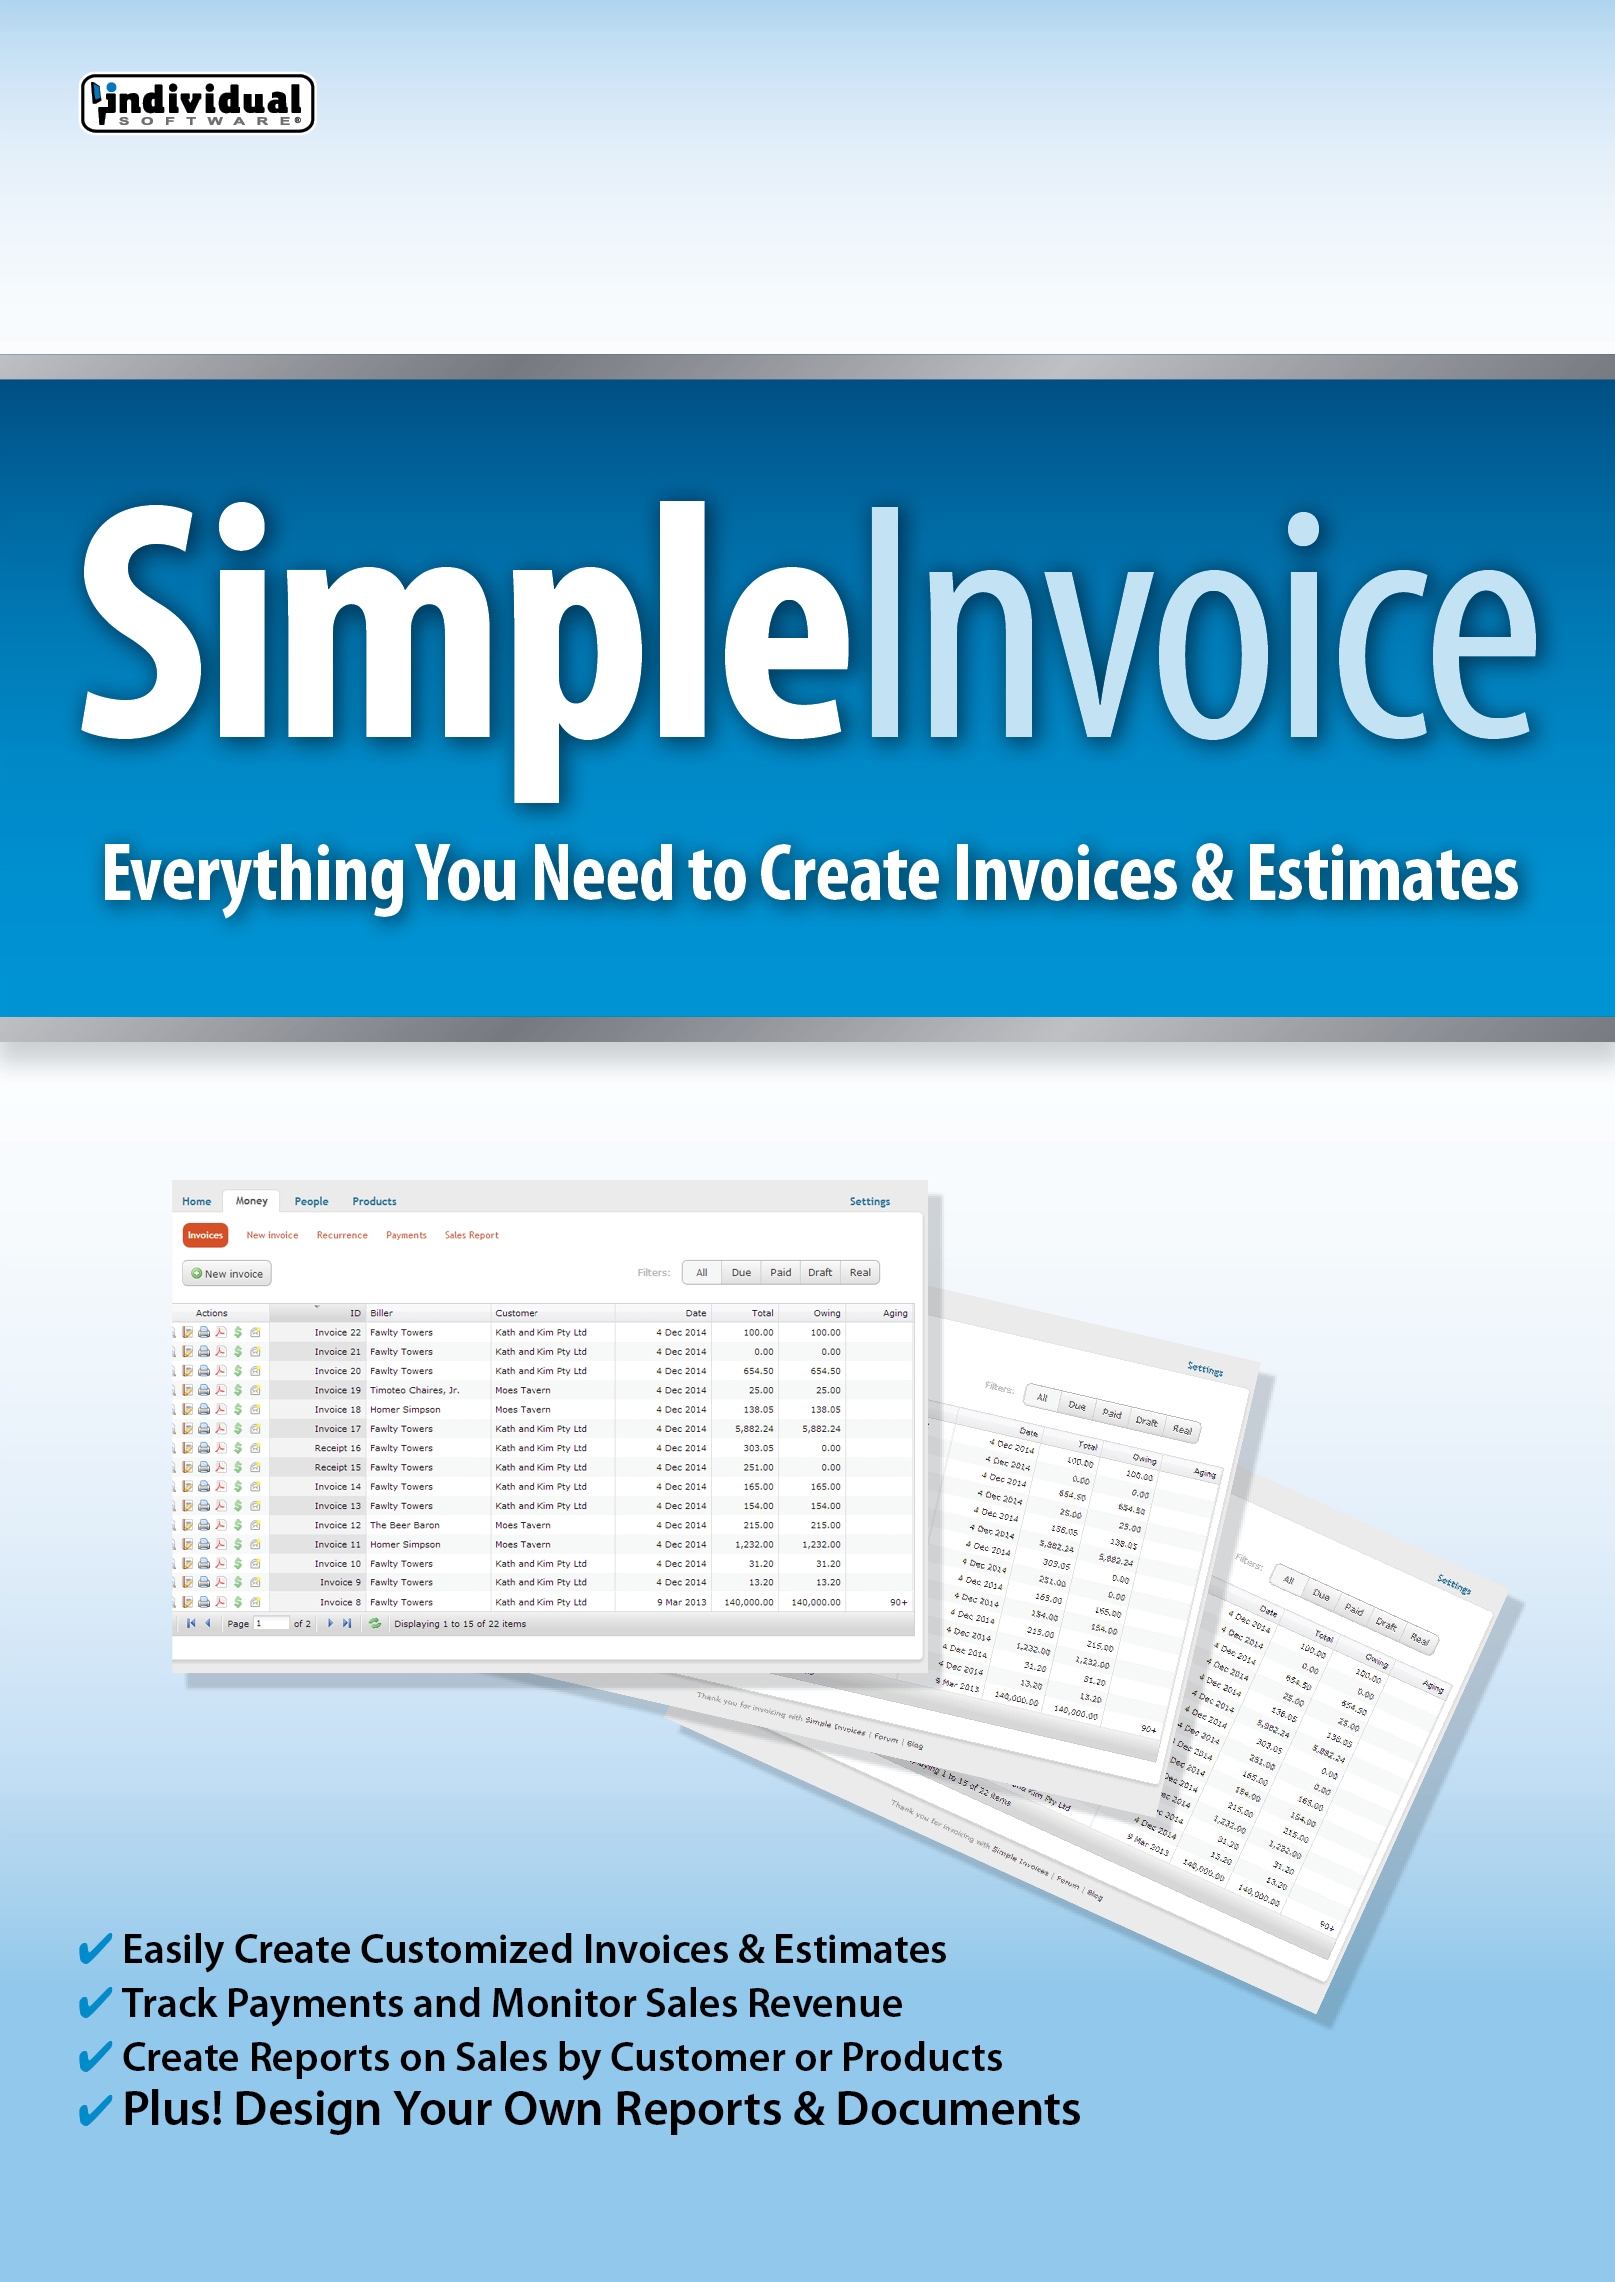 simpleinvoice individual software invoices and estimates software